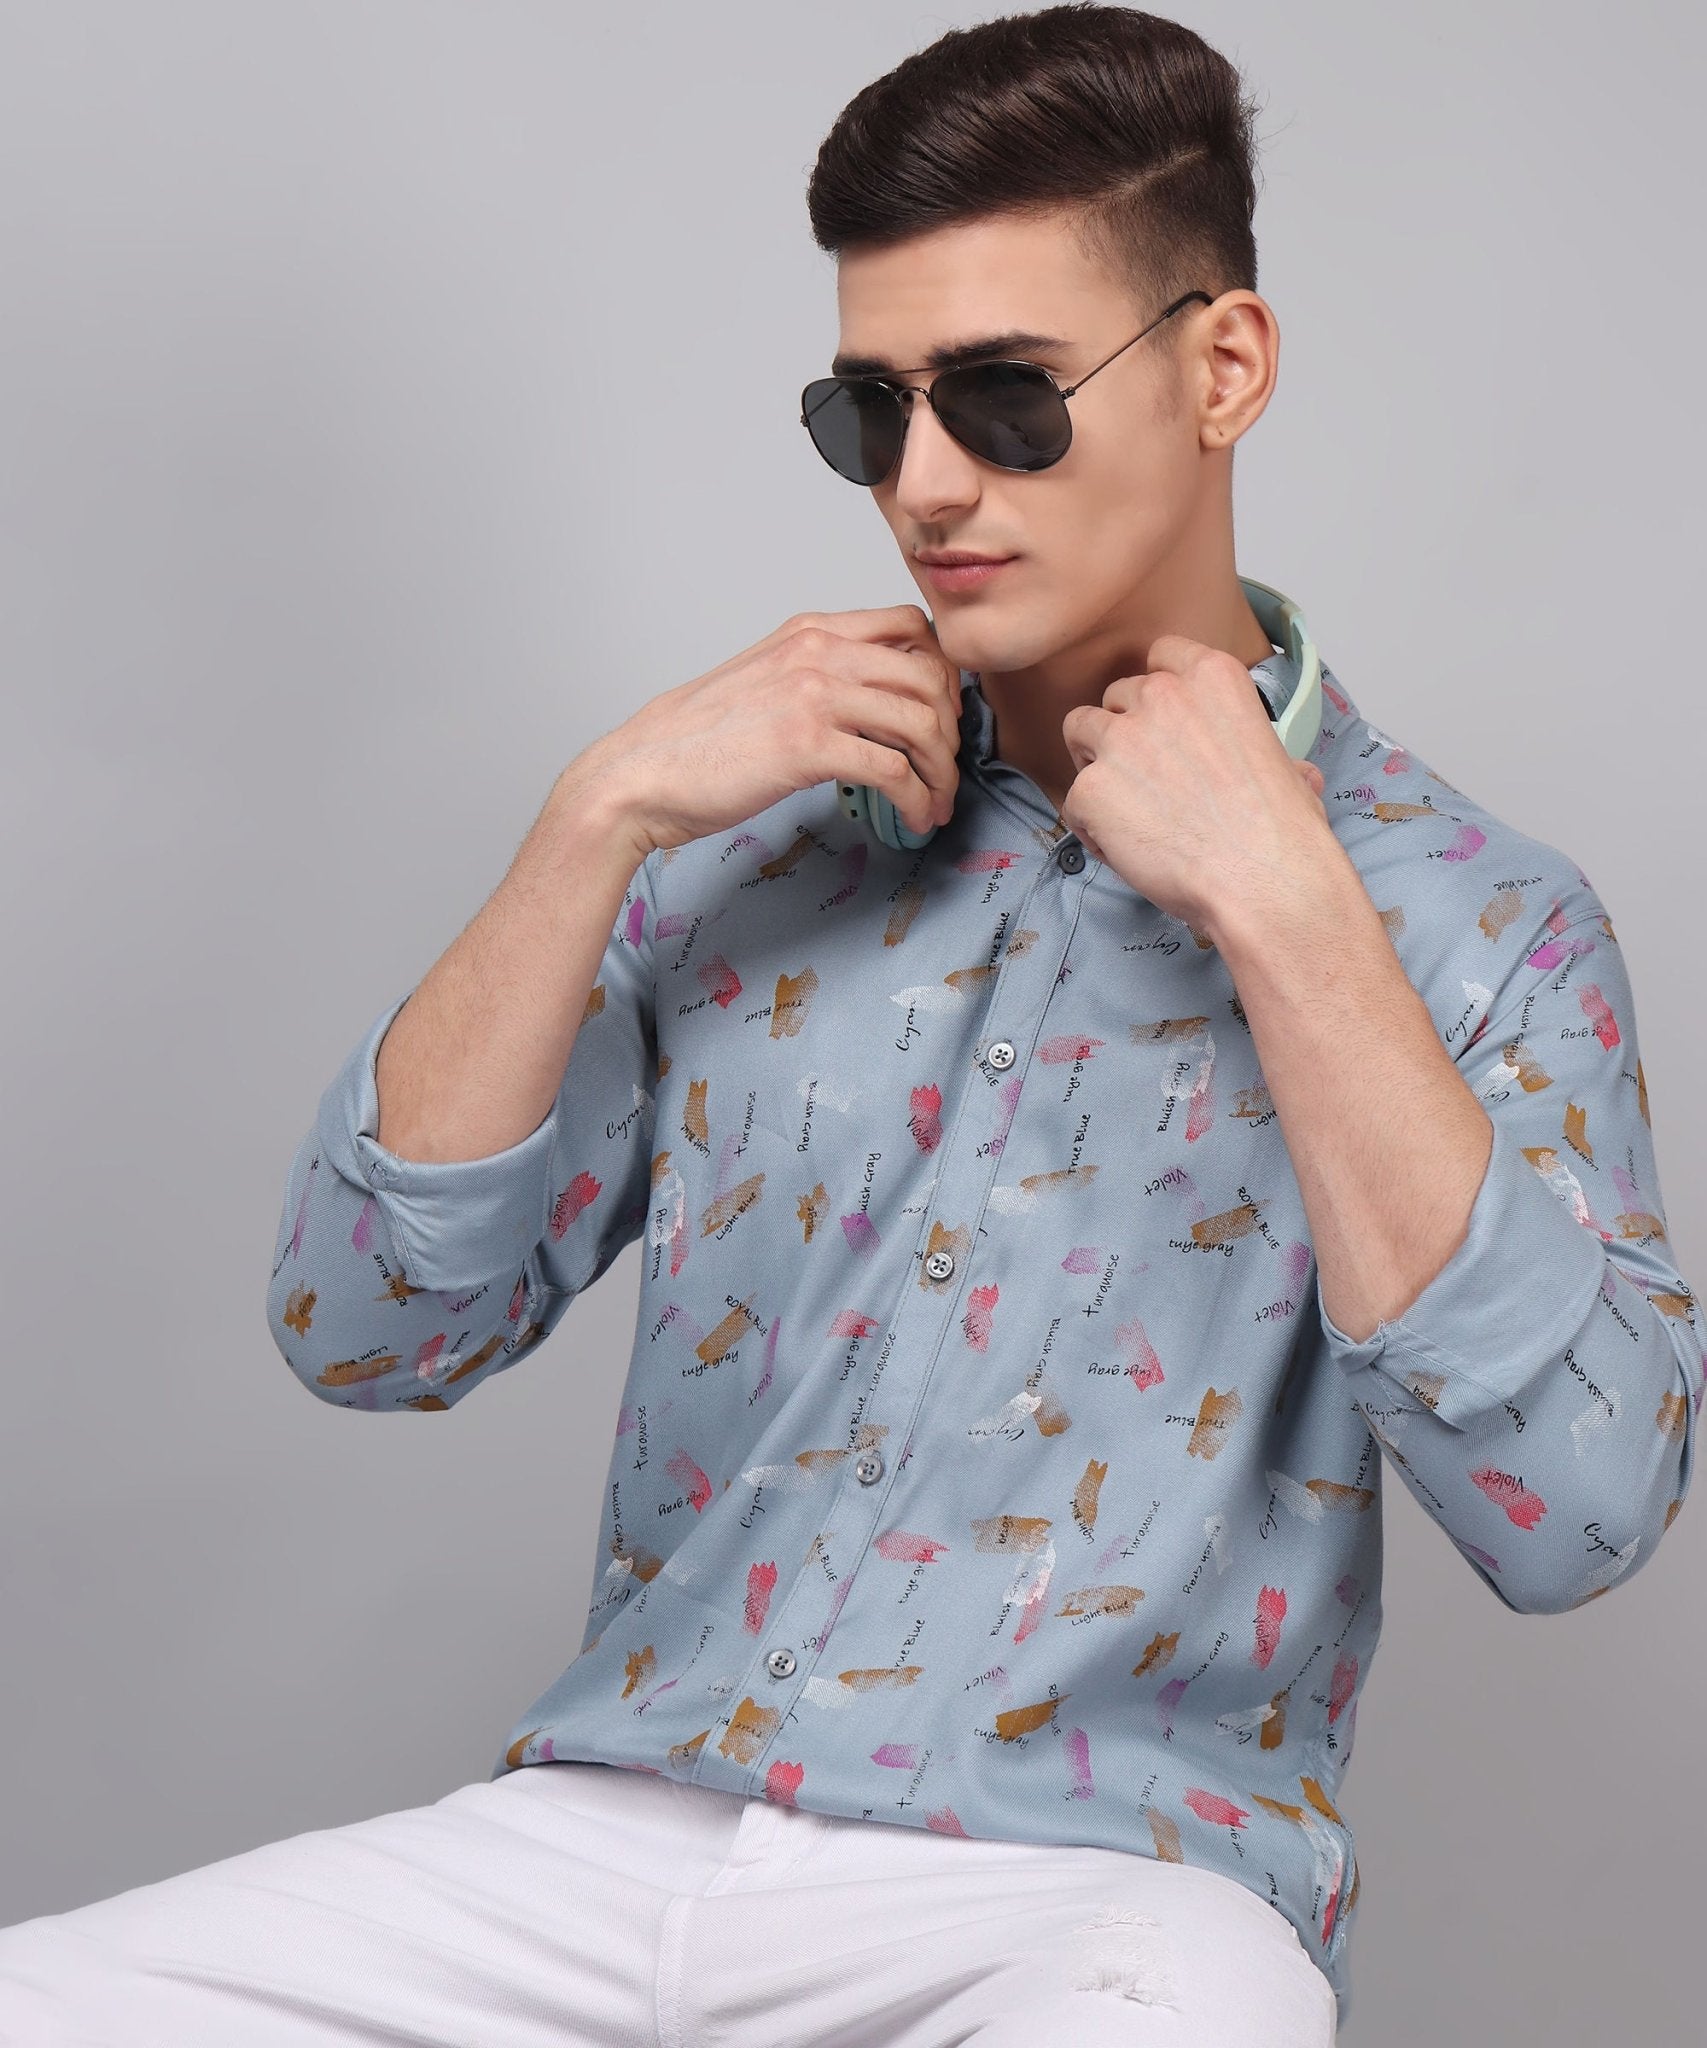 Classy Printed Multi Colored Cotton Casual Shirt for Men by Trybuy Premium - TryBuy® USA🇺🇸